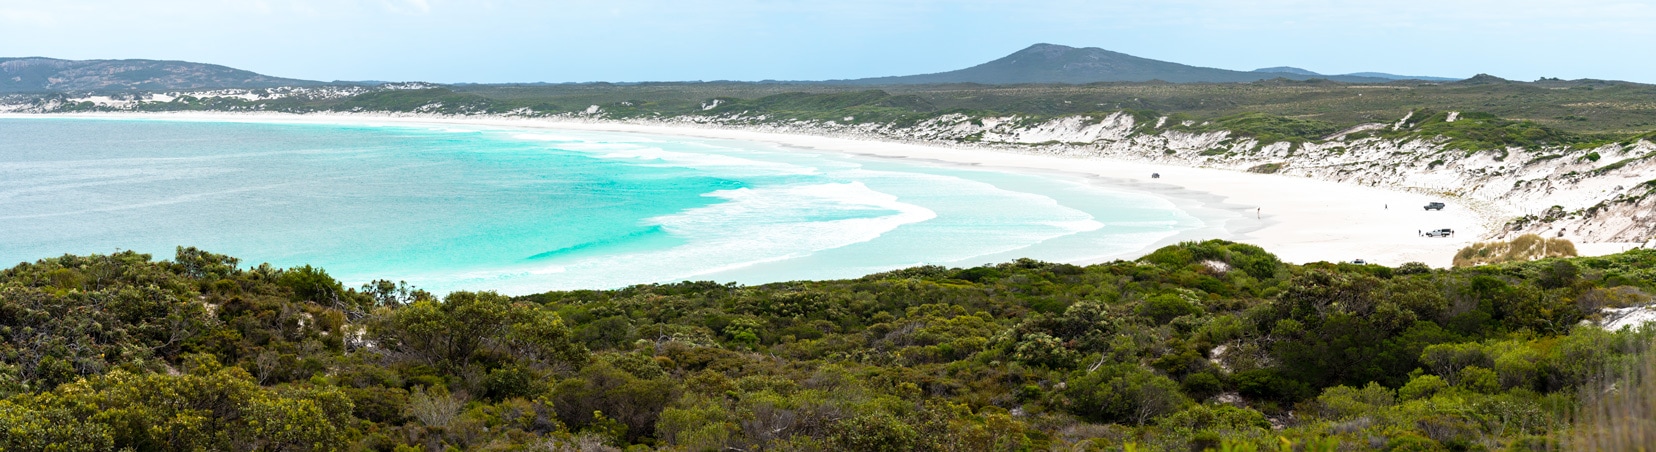 Panorama of Wharton Beach - white sand, blue ocean with low greenery bushland on the shore